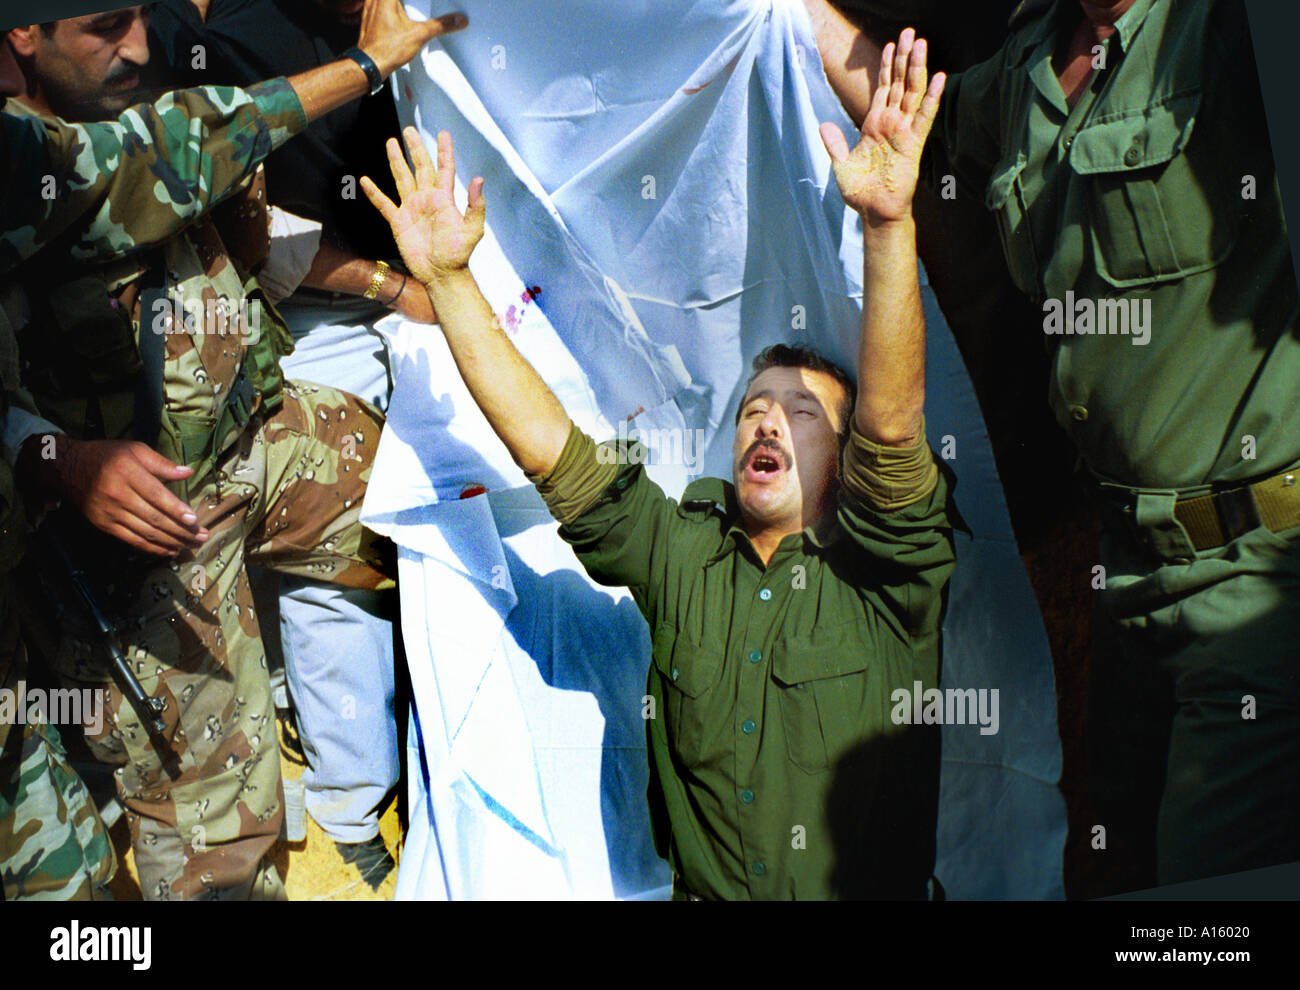 A Palestinian soldier raises his hands and expresses his despair after he buried Musbah Abdelgadr Abu Atig 27 who was killed by Stock Photo